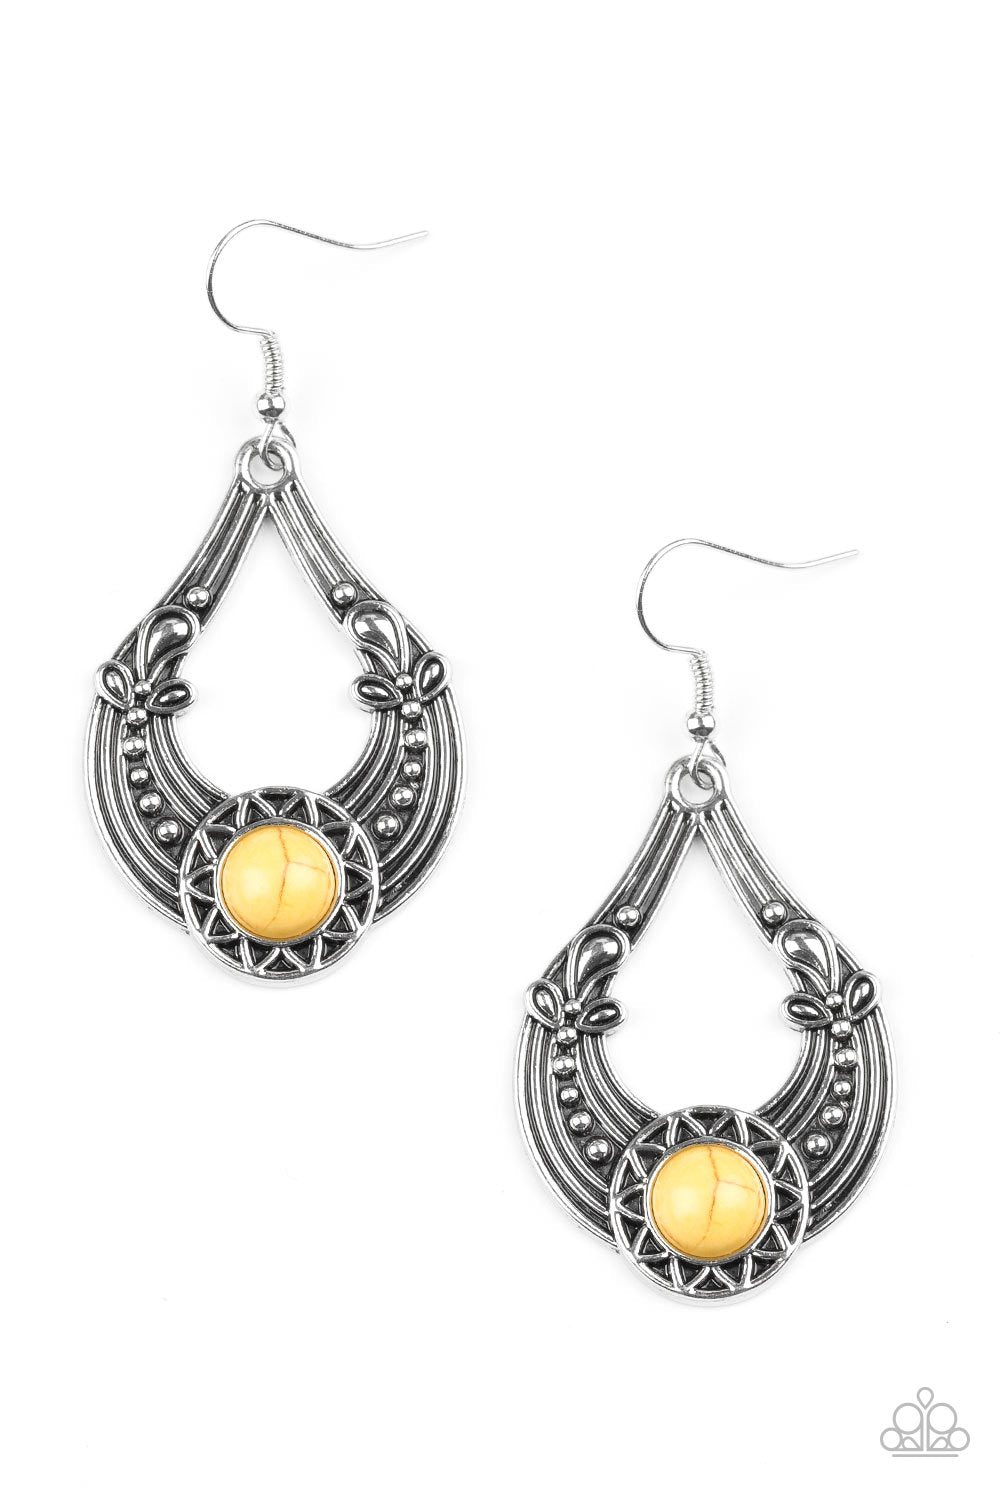 Sol Sonata Silver and Yellow Stone Earrings - Paparazzi Accessories-CarasShop.com - $5 Jewelry by Cara Jewels